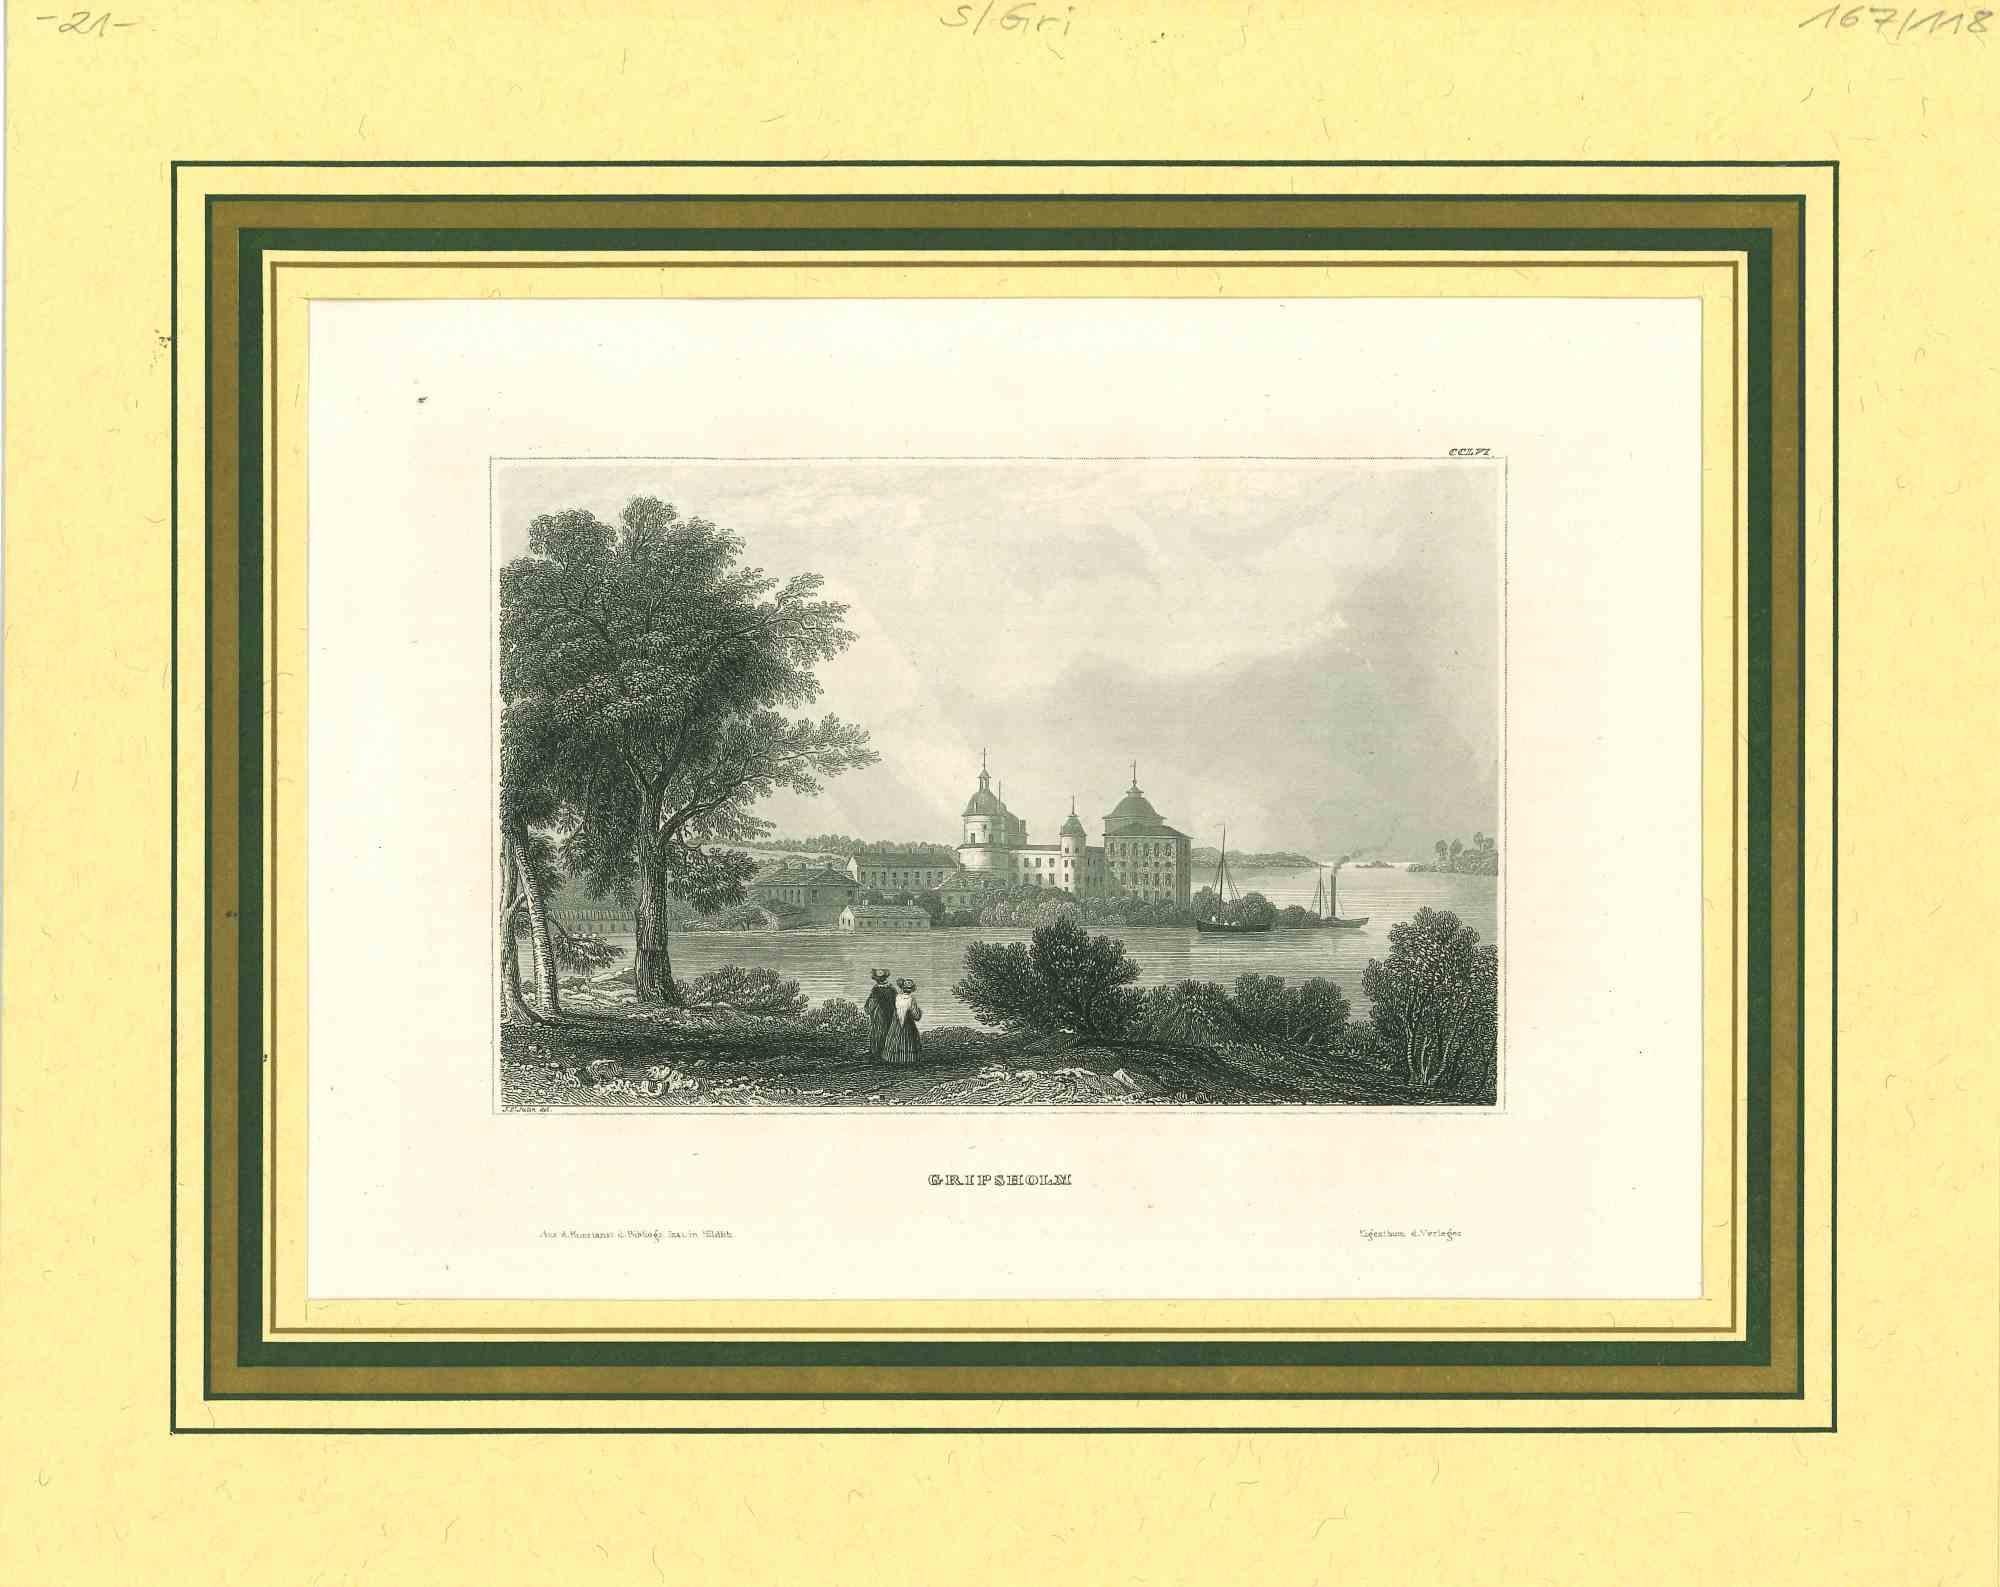 Unknown Figurative Print - Ancient View of Gripscholm - Original Lithograph - Mid-19th Century